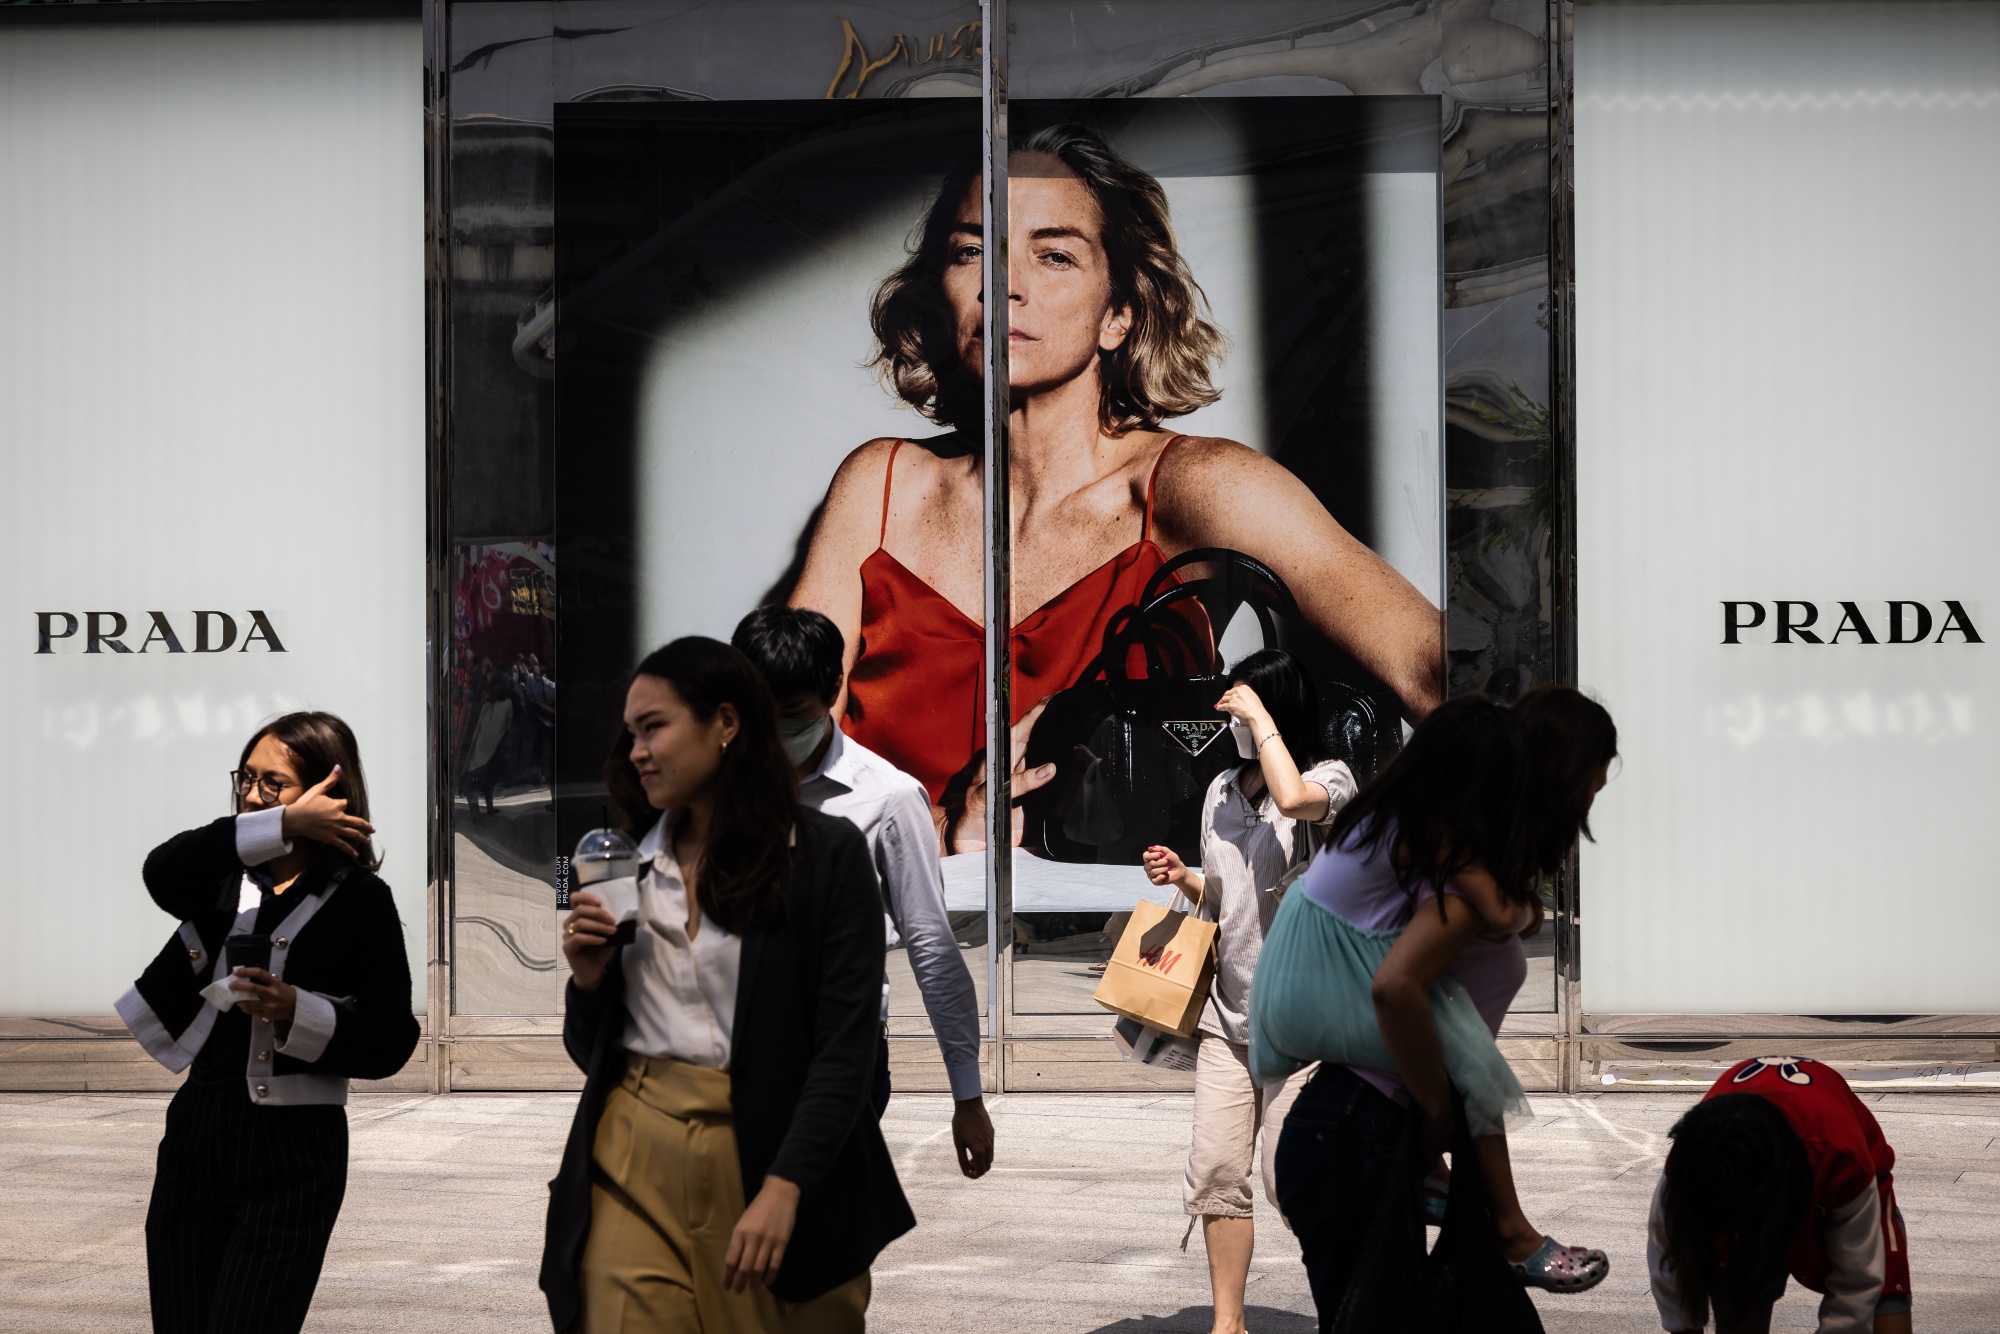 Prada Sales Jump as Leather Slingback Pumps Are New Fashion Hit - Bloomberg